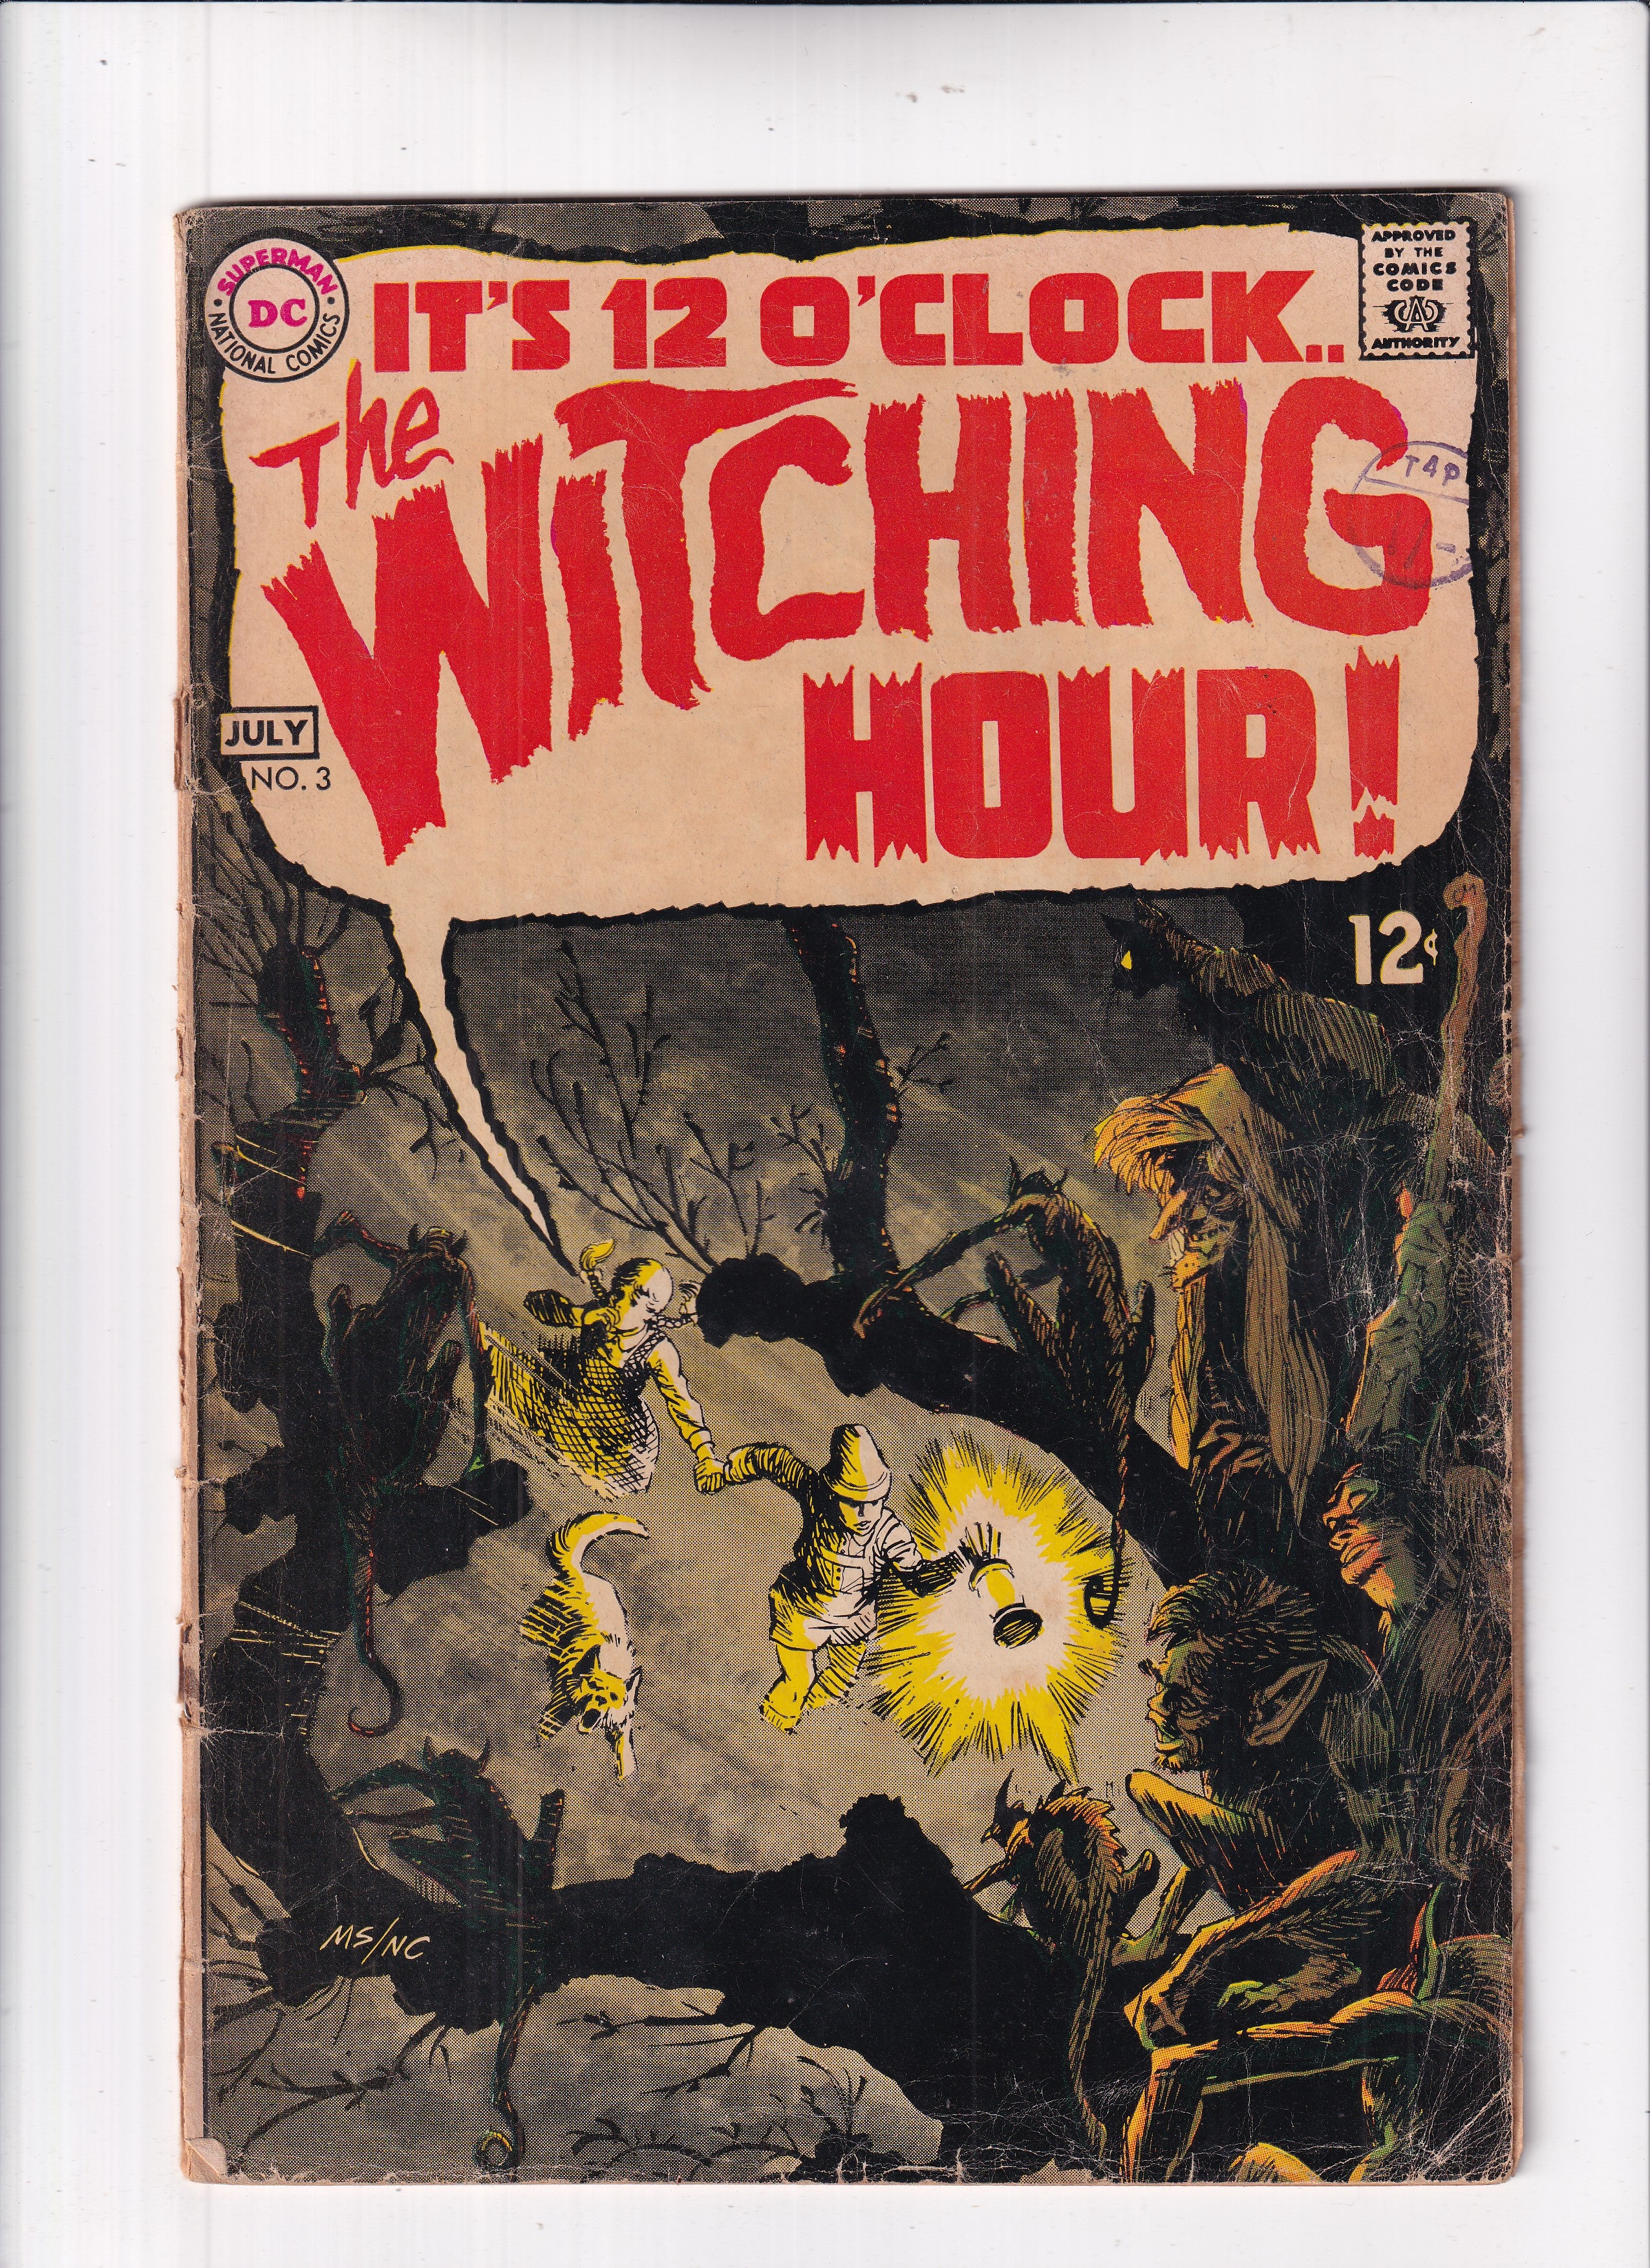 WITCHING HOUR #3 (DETACHED) - Slab City Comics 